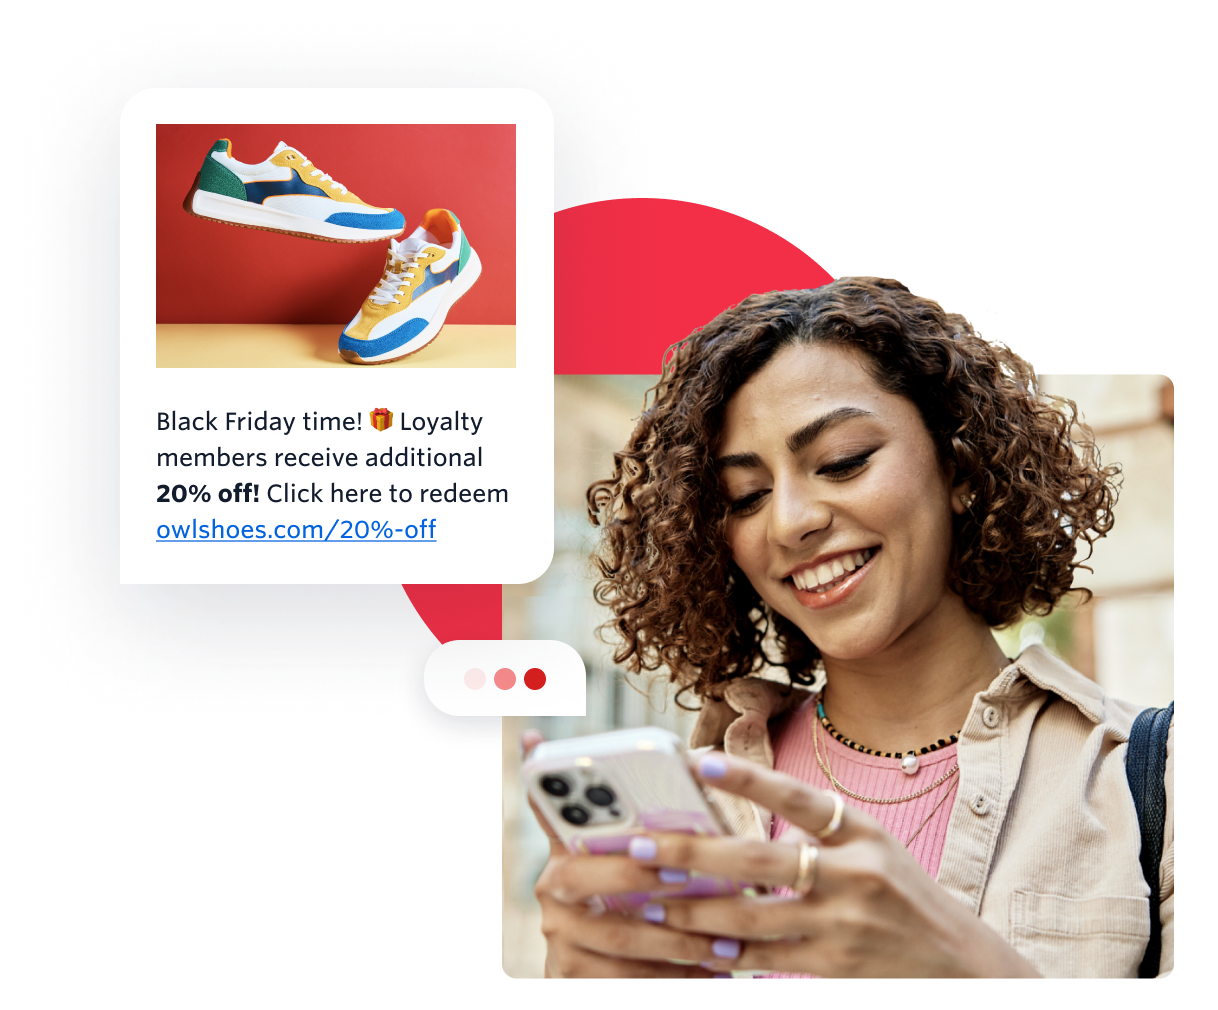 Customer engaging with SMS marketing